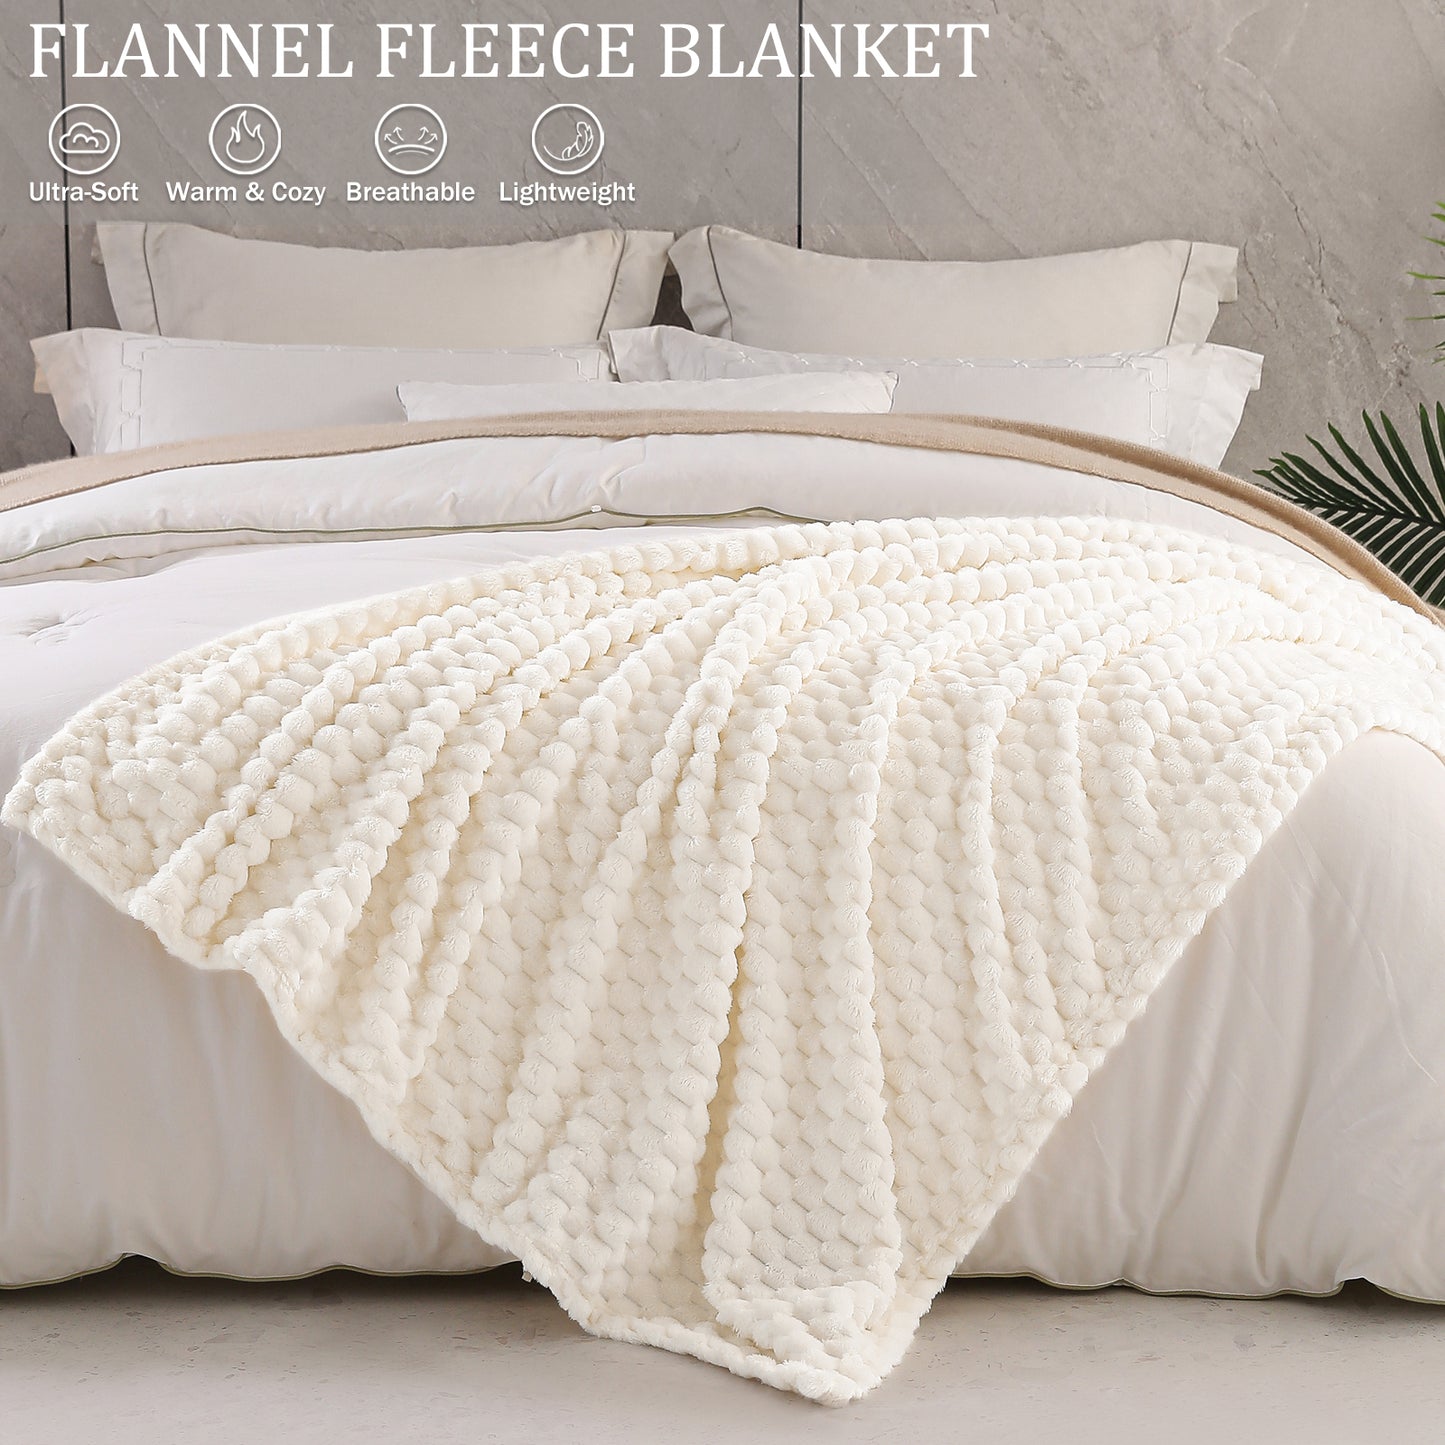 Exclusivo Mezcla King Size Flannel Fleece Blanket, 90x104 Inches Stylish Jacquard Velvet Plush Blanket for Bed, Cozy, Warm, Lightweight and Decorative Off White Blanket